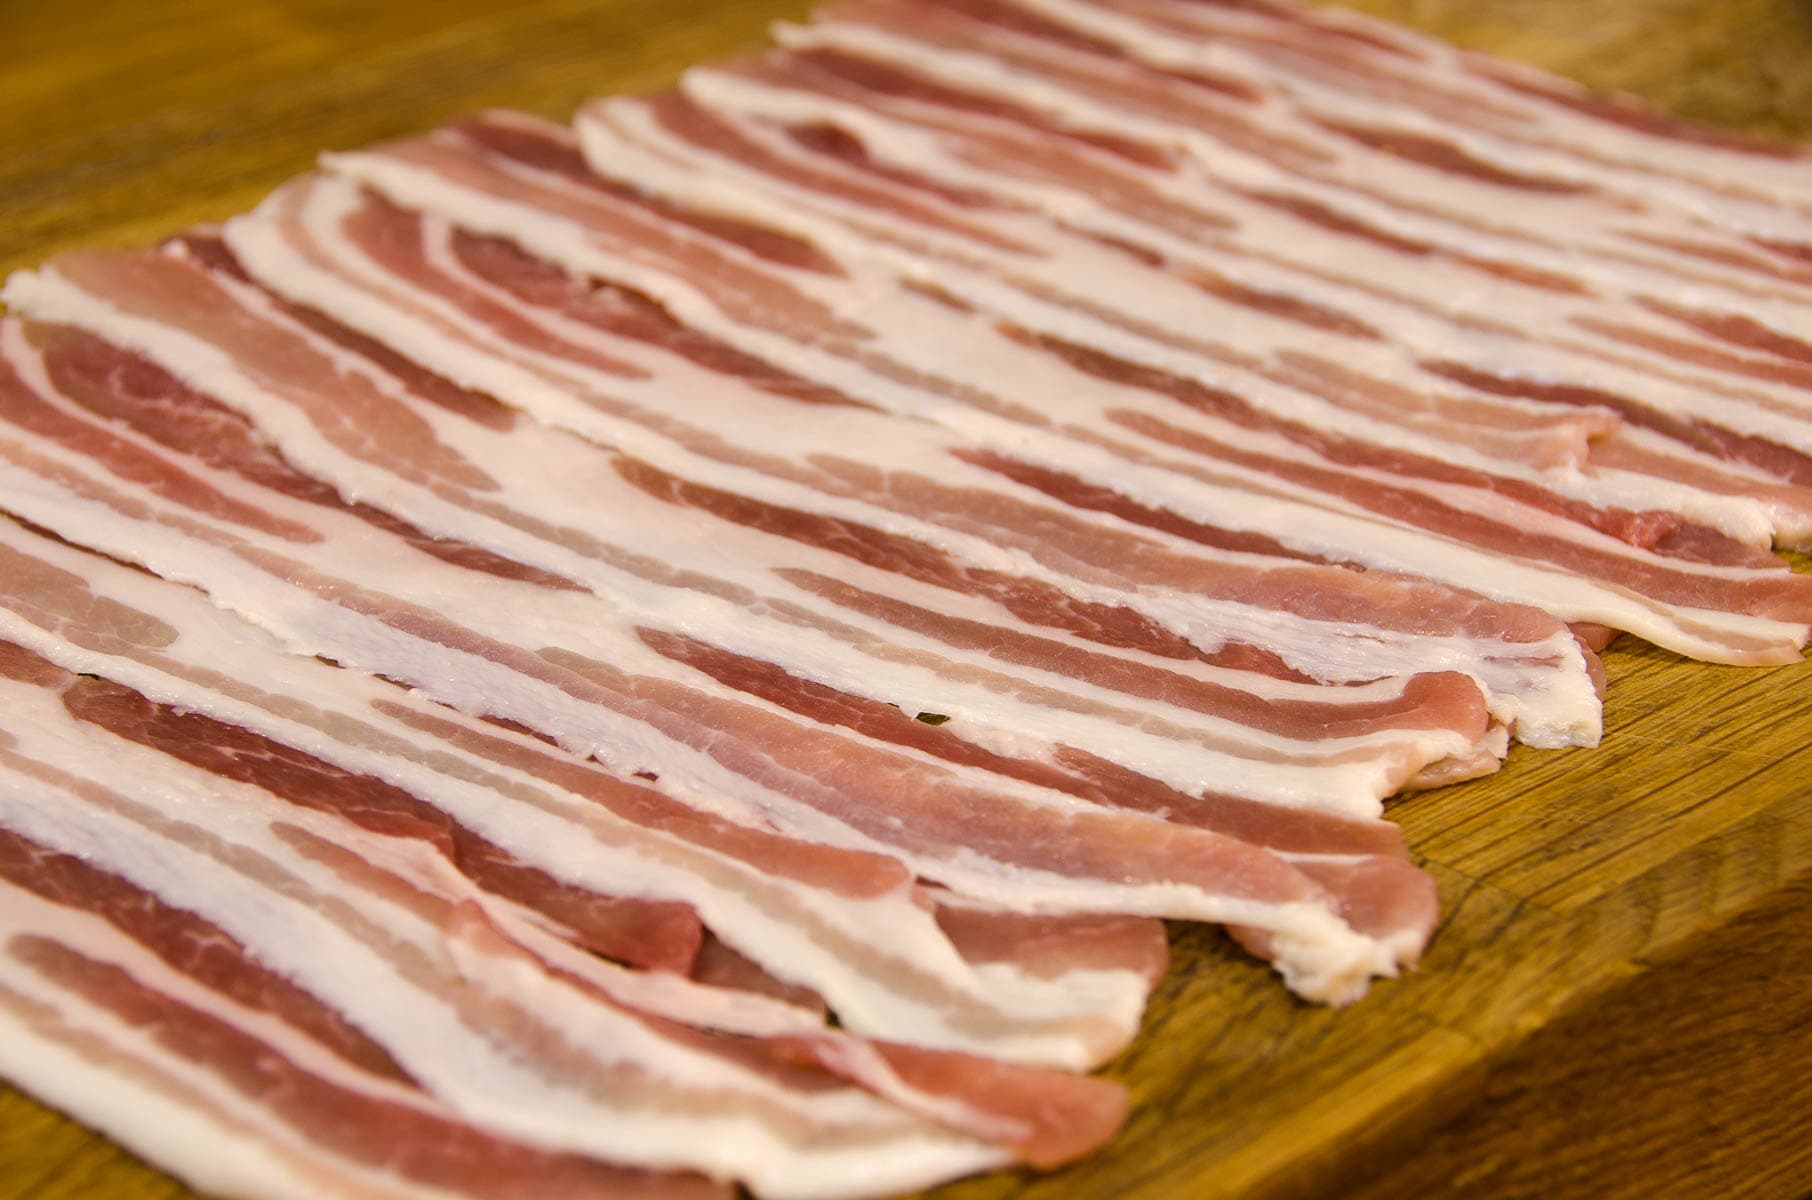 Strips of smoked streaky bacon on a wooden board.